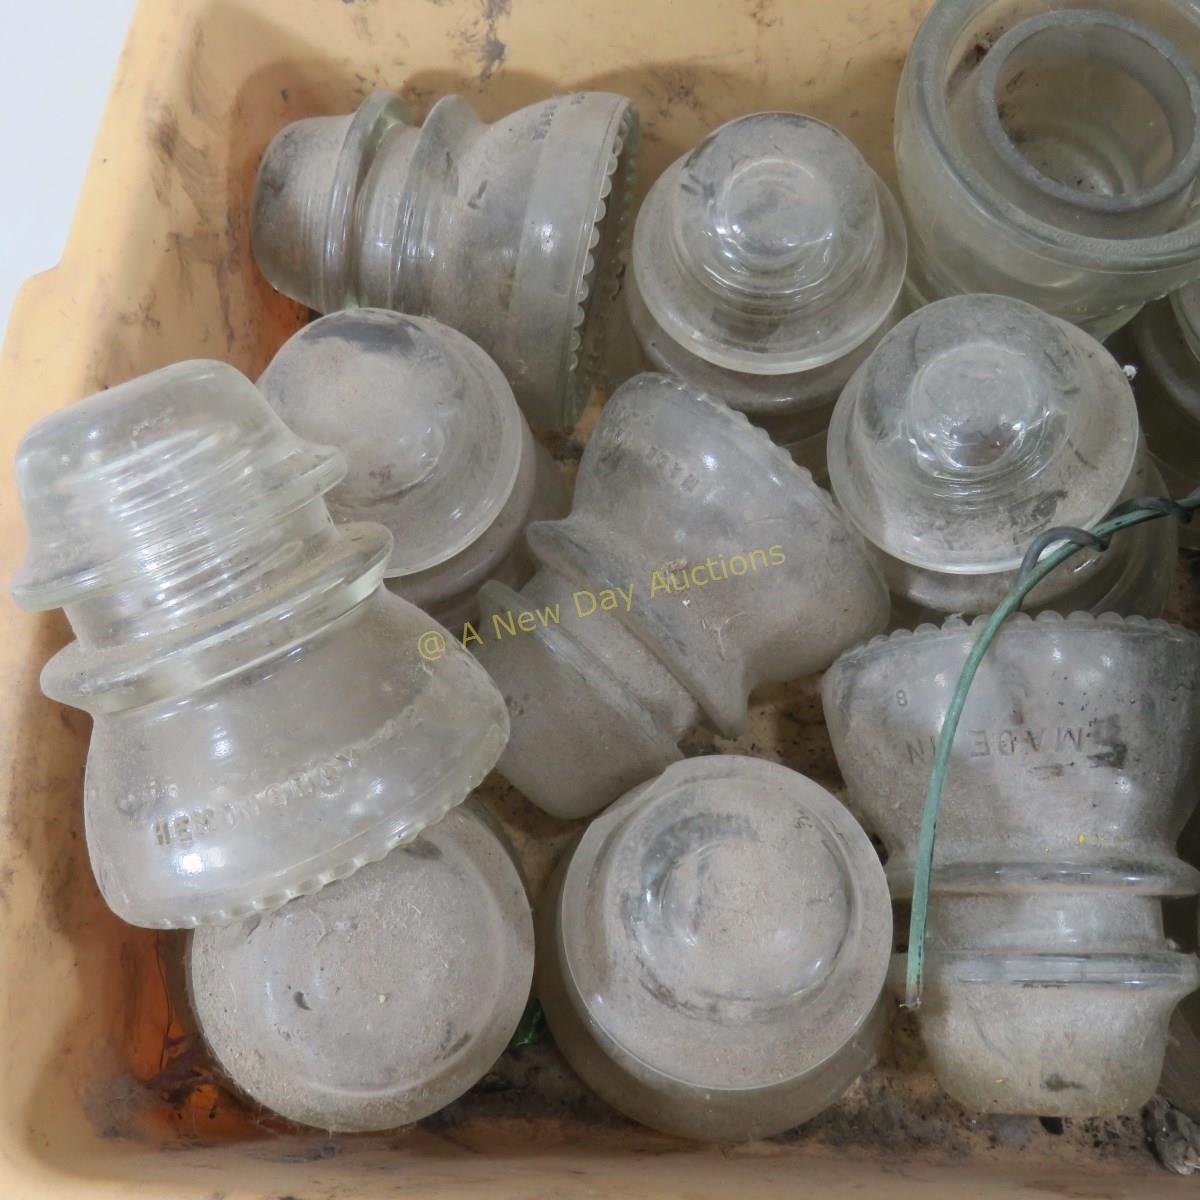 Box of Date Nails, Insulators and Wrench